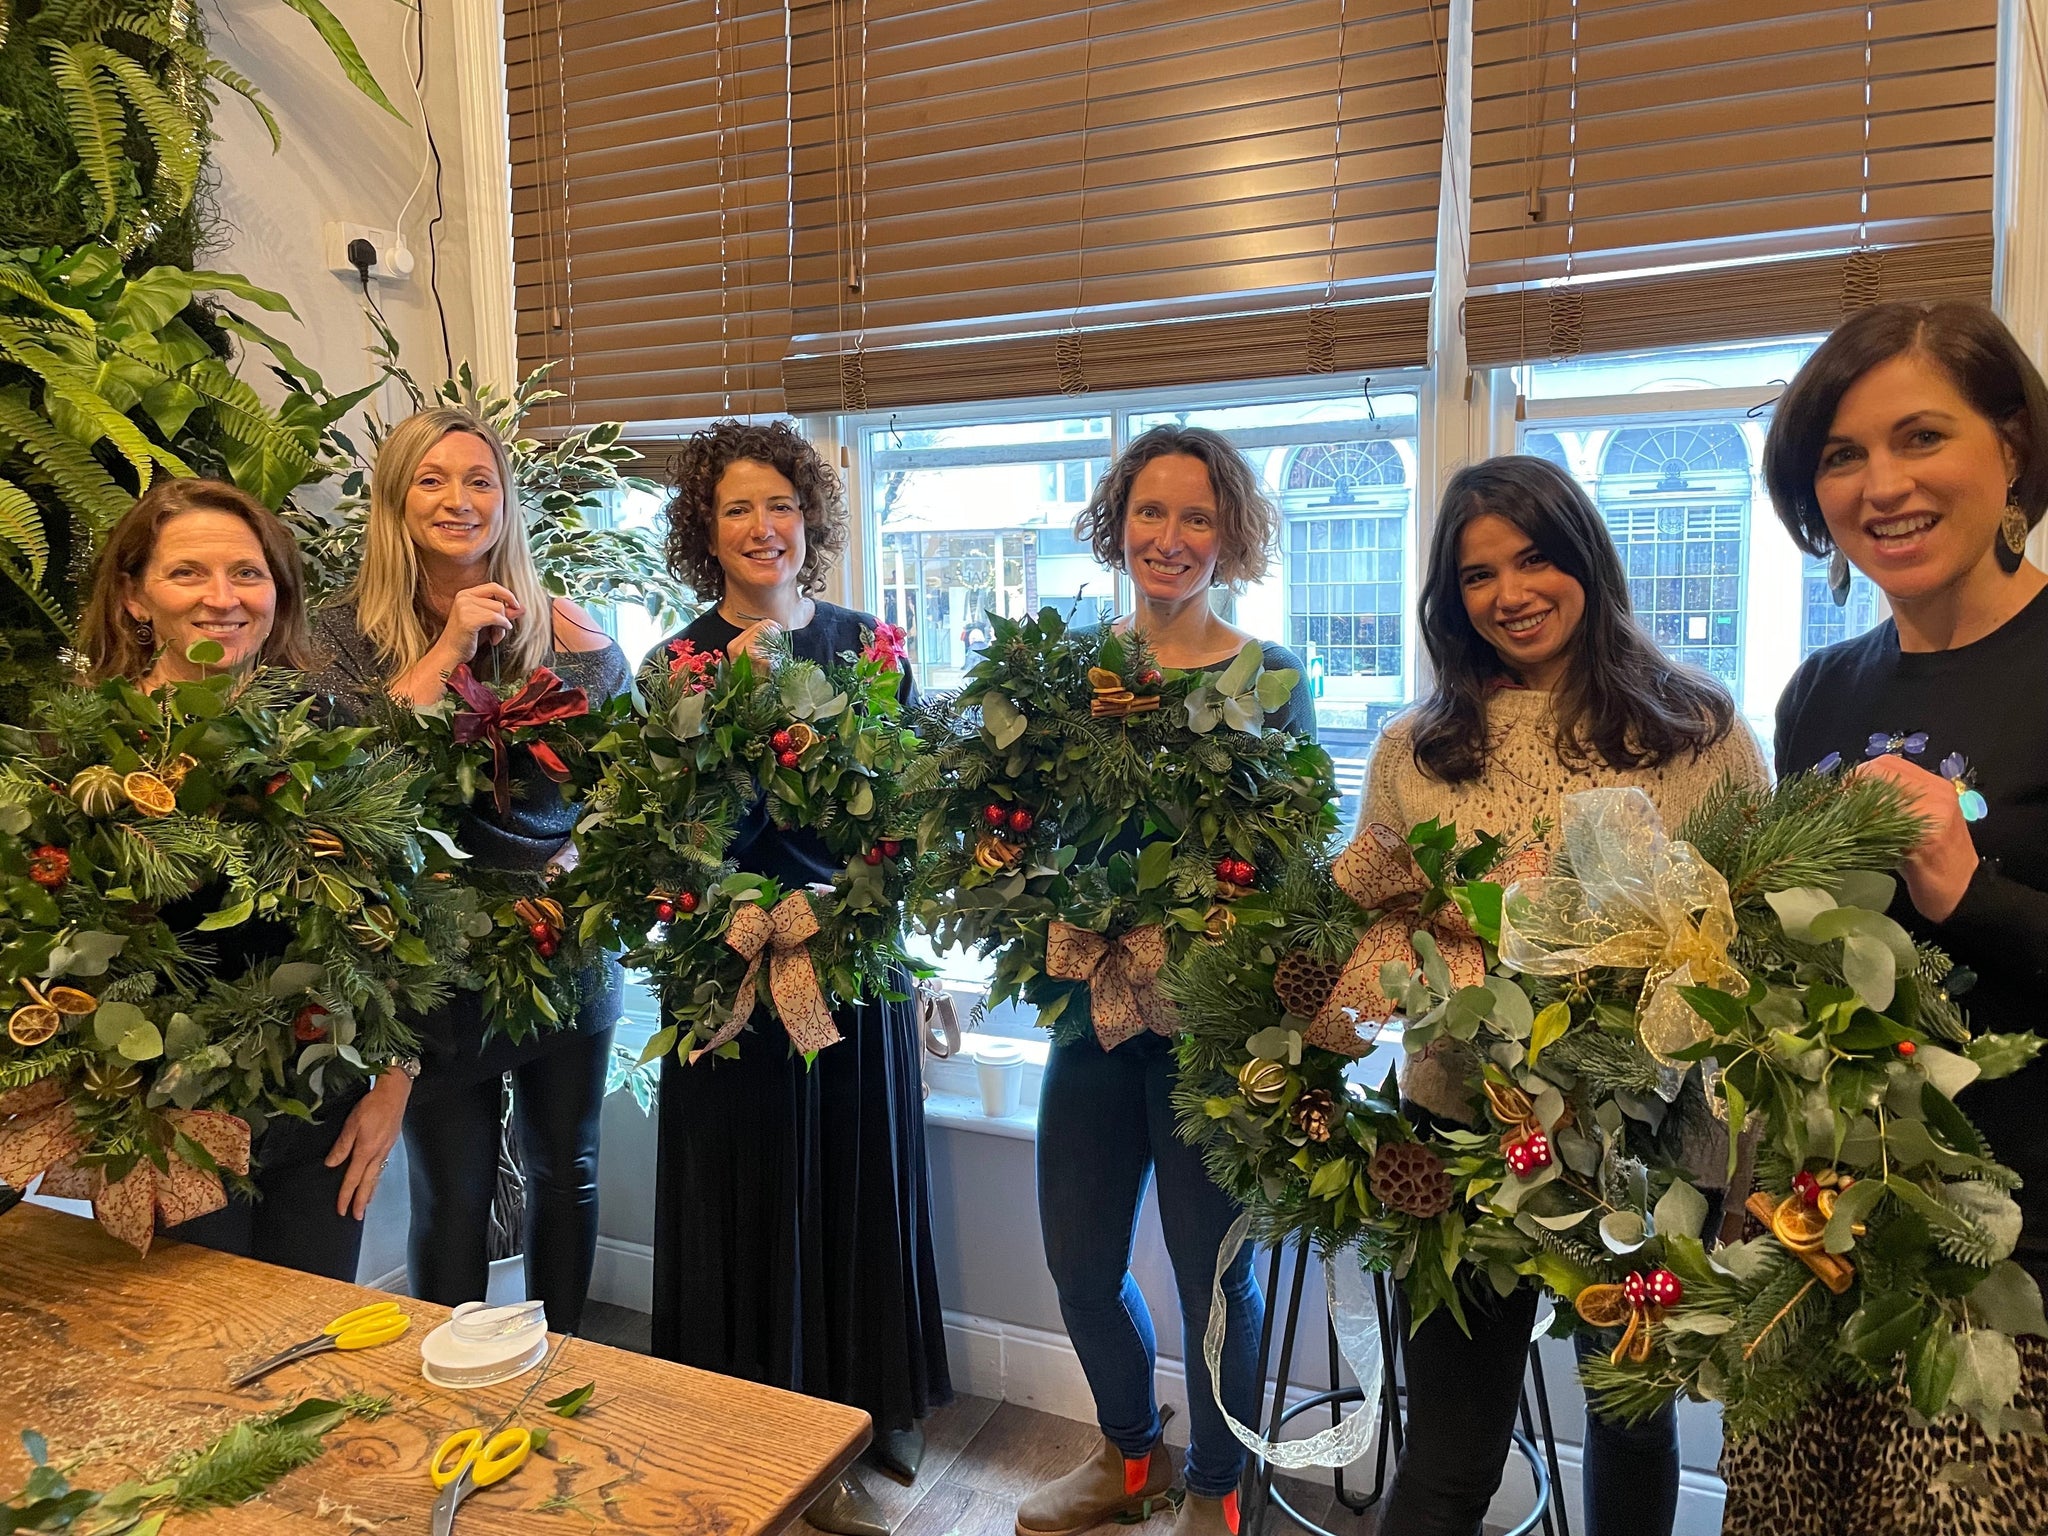 Christmas Wreath Workshop – Wednesday 6th December, Starting @ 11am (£75 per person) 2.5 hours